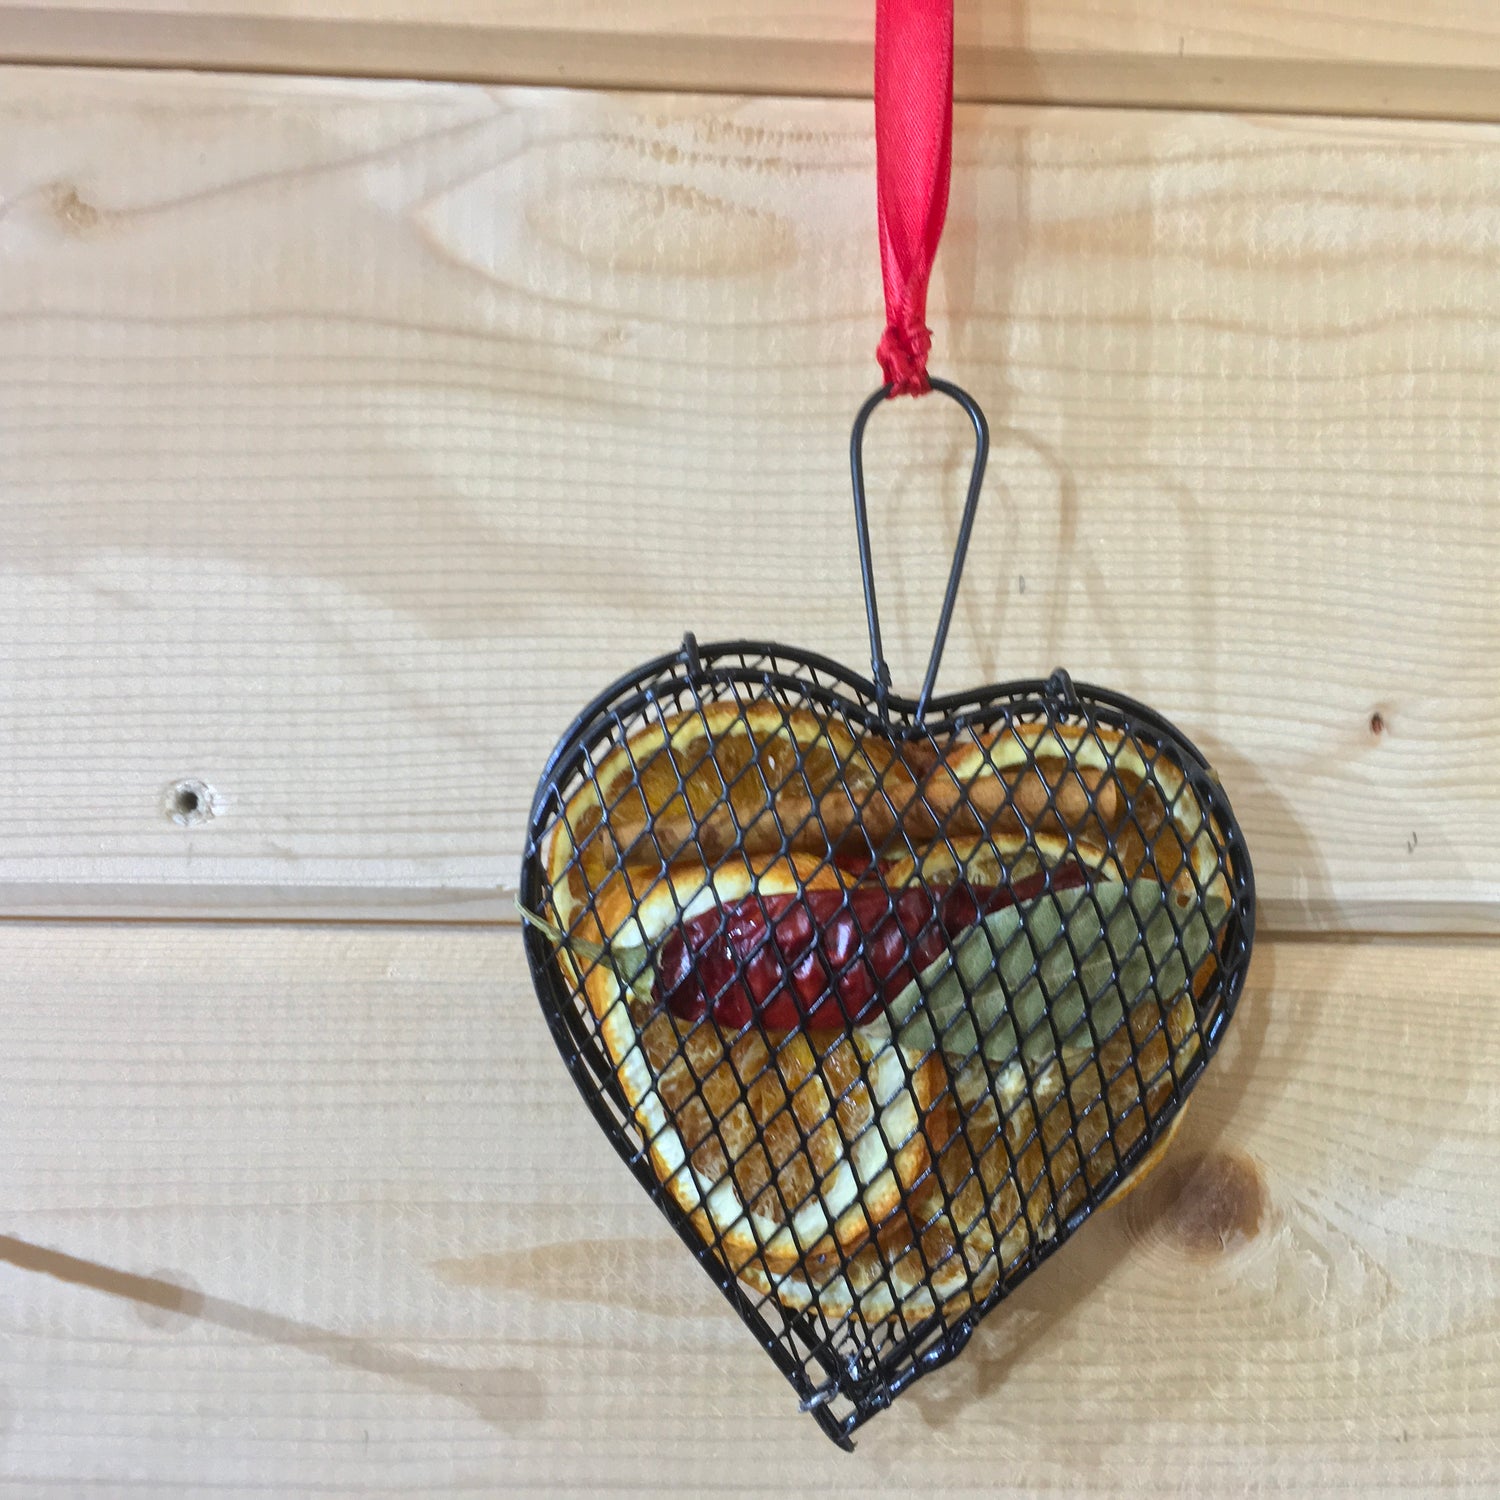 Dried Christmas heart of orange slices, cinnamon & chili to make your house smell festive.